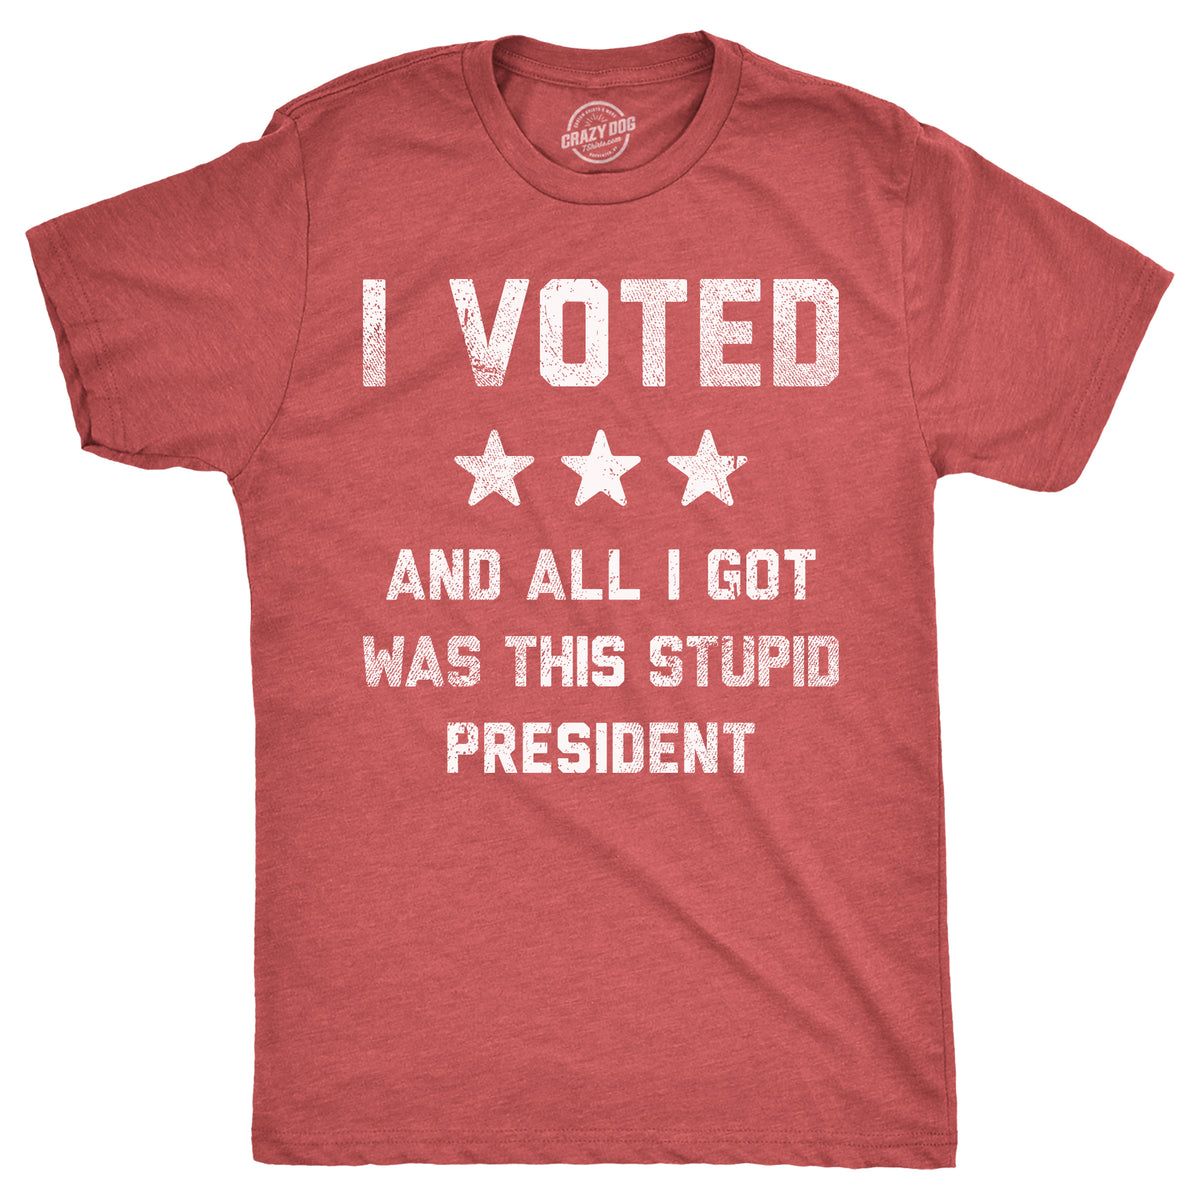 Funny Heather Red - Voted Stupid President I Voted And All I Got Was This Stupid President Mens T Shirt Nerdy Political sarcastic Tee